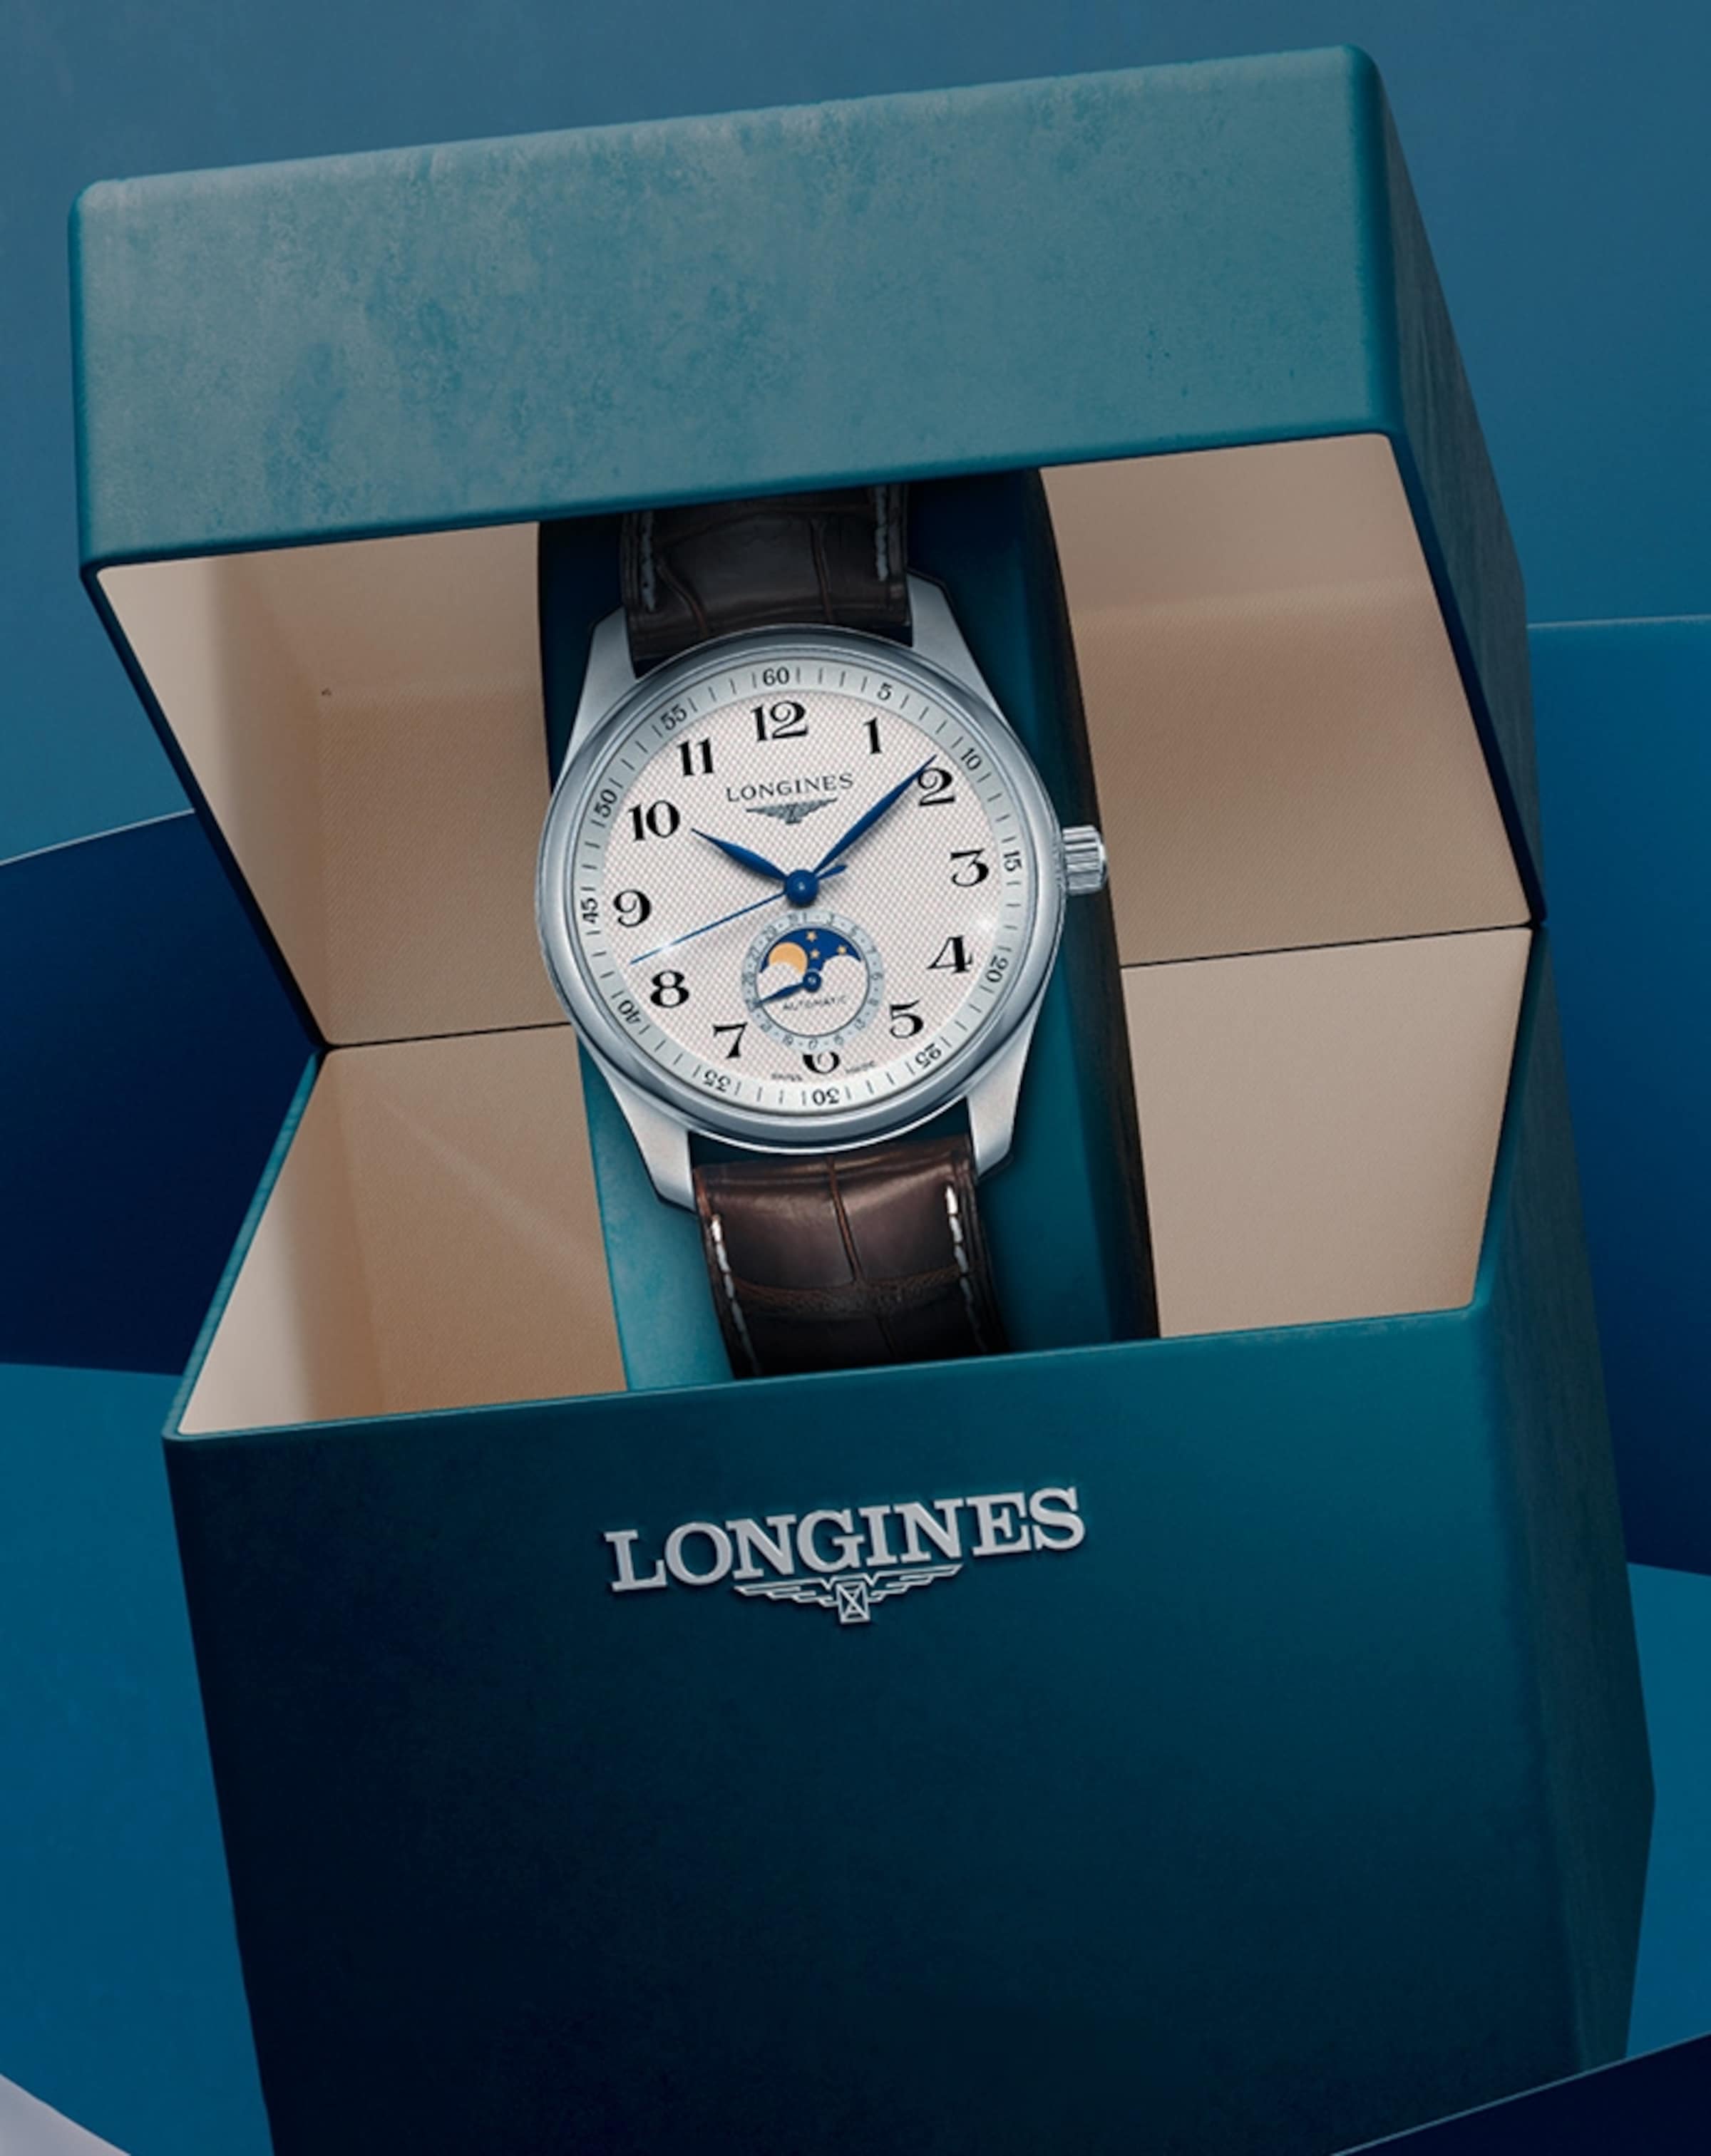 a Longines watch in a gift box